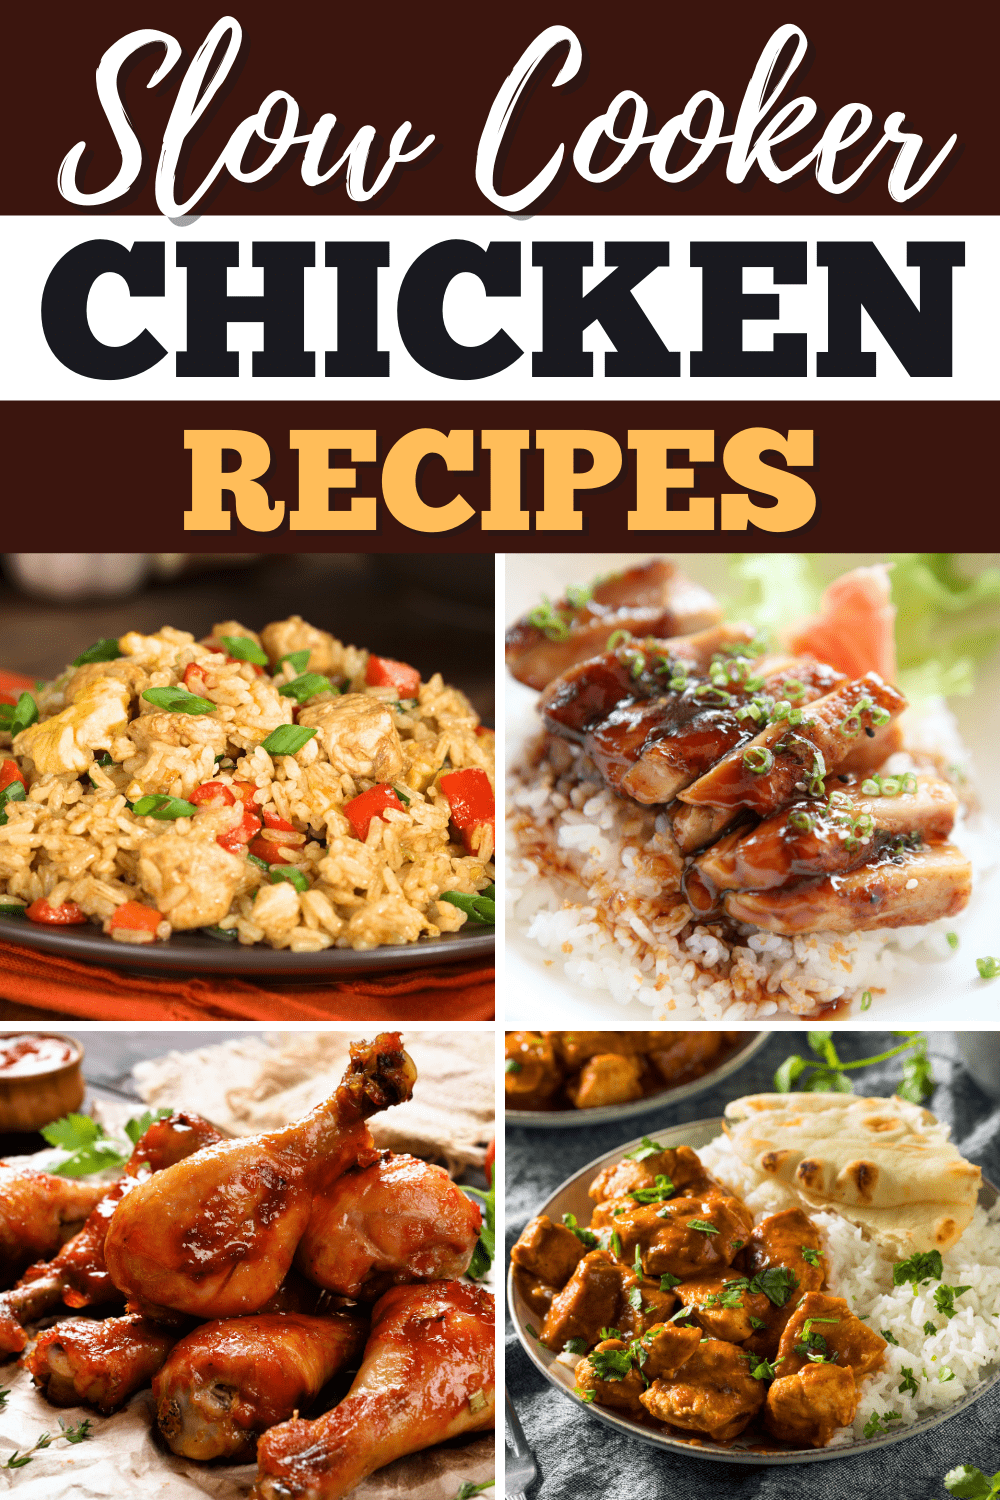 Slow Cooker Chicken Recipes